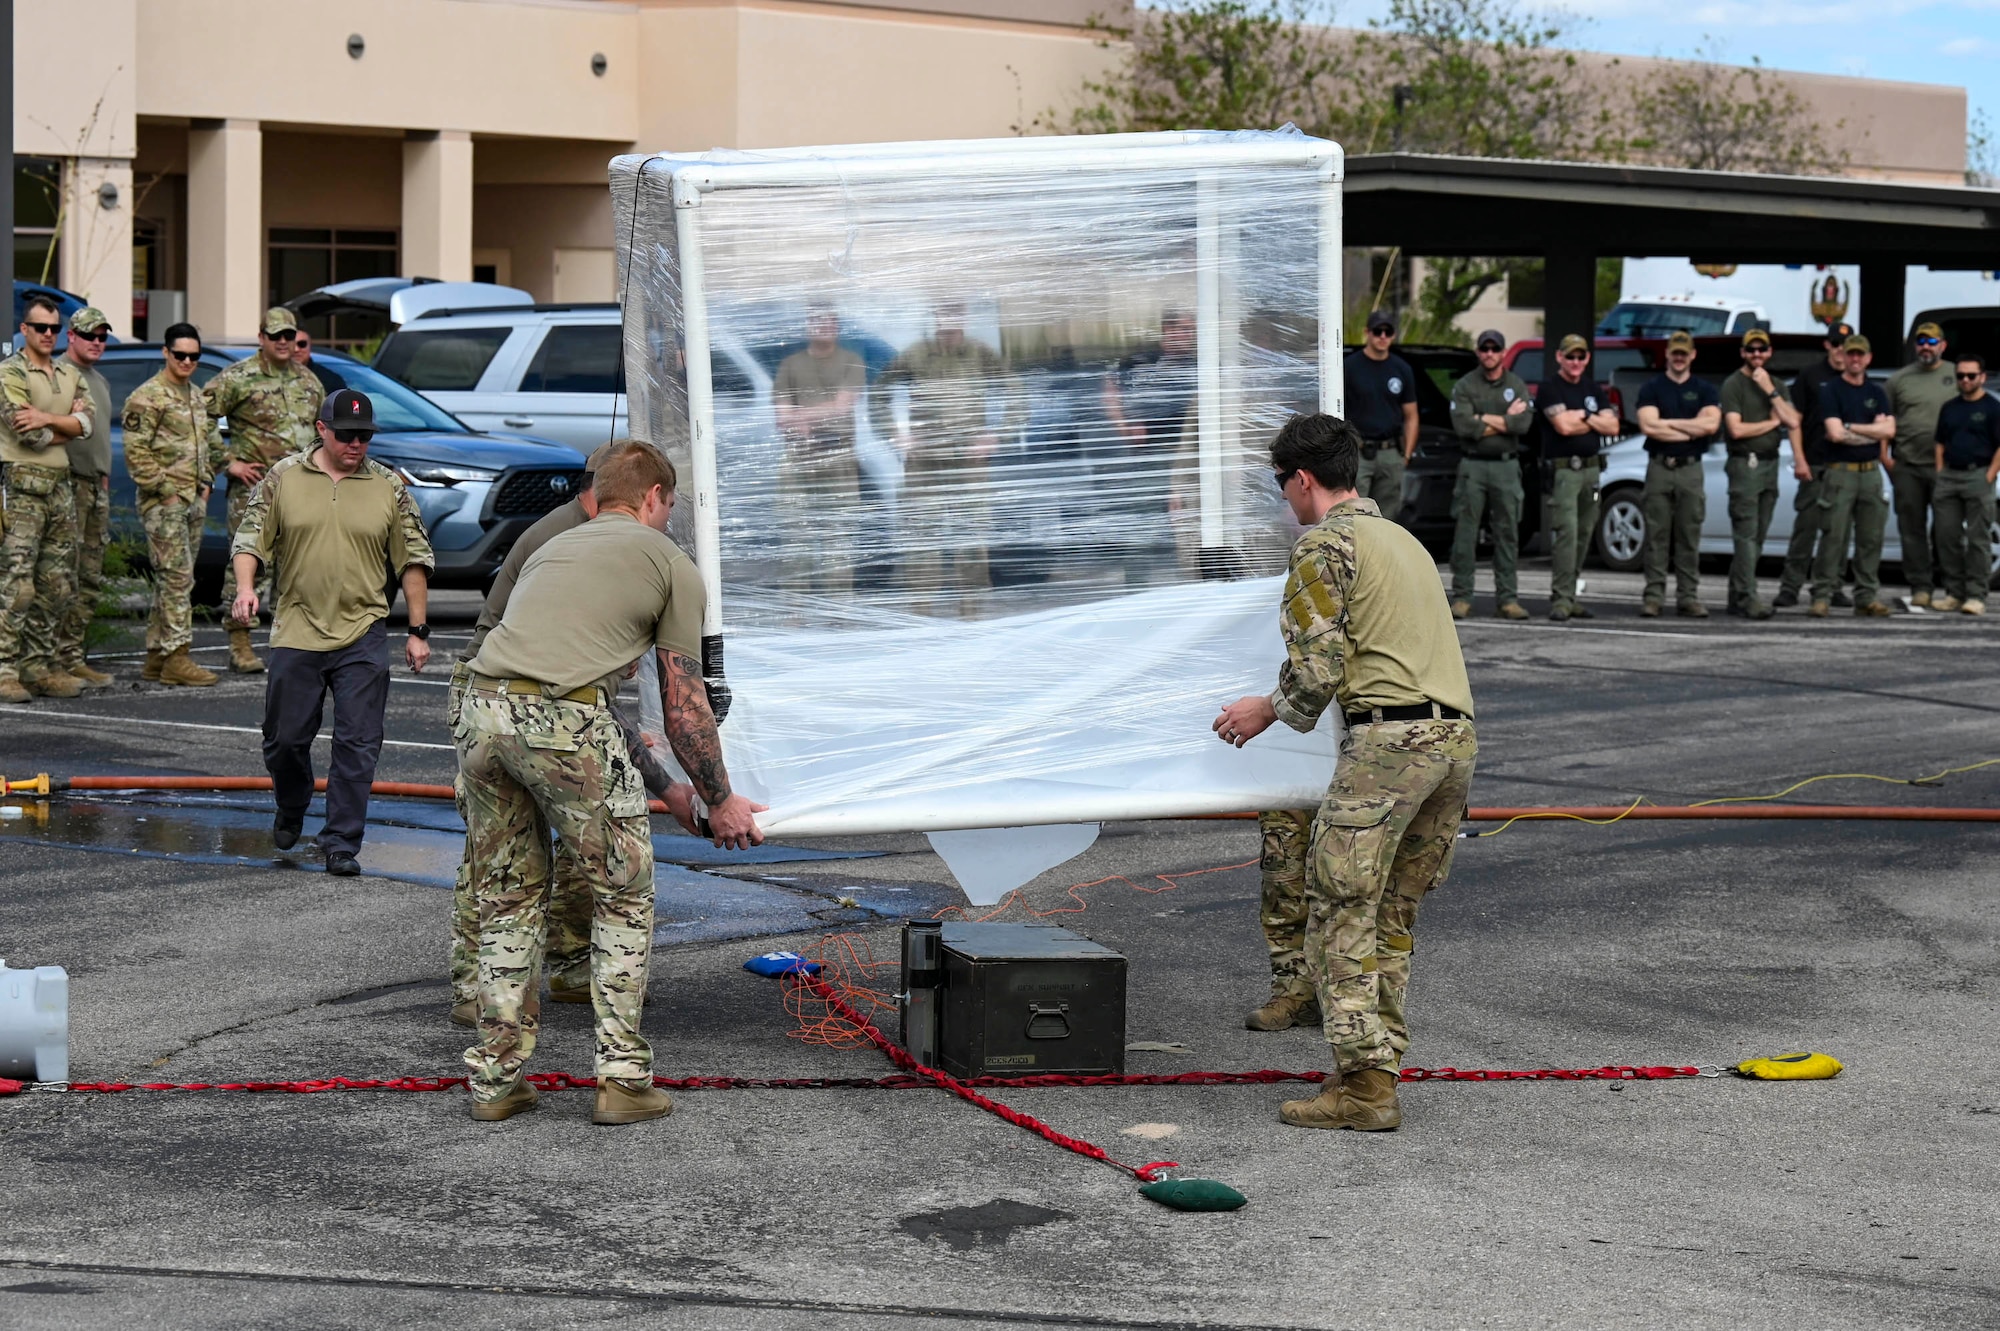 Air Force airmen carry an impromptu made large box made of PVC piping and wrapped in plastic wrap